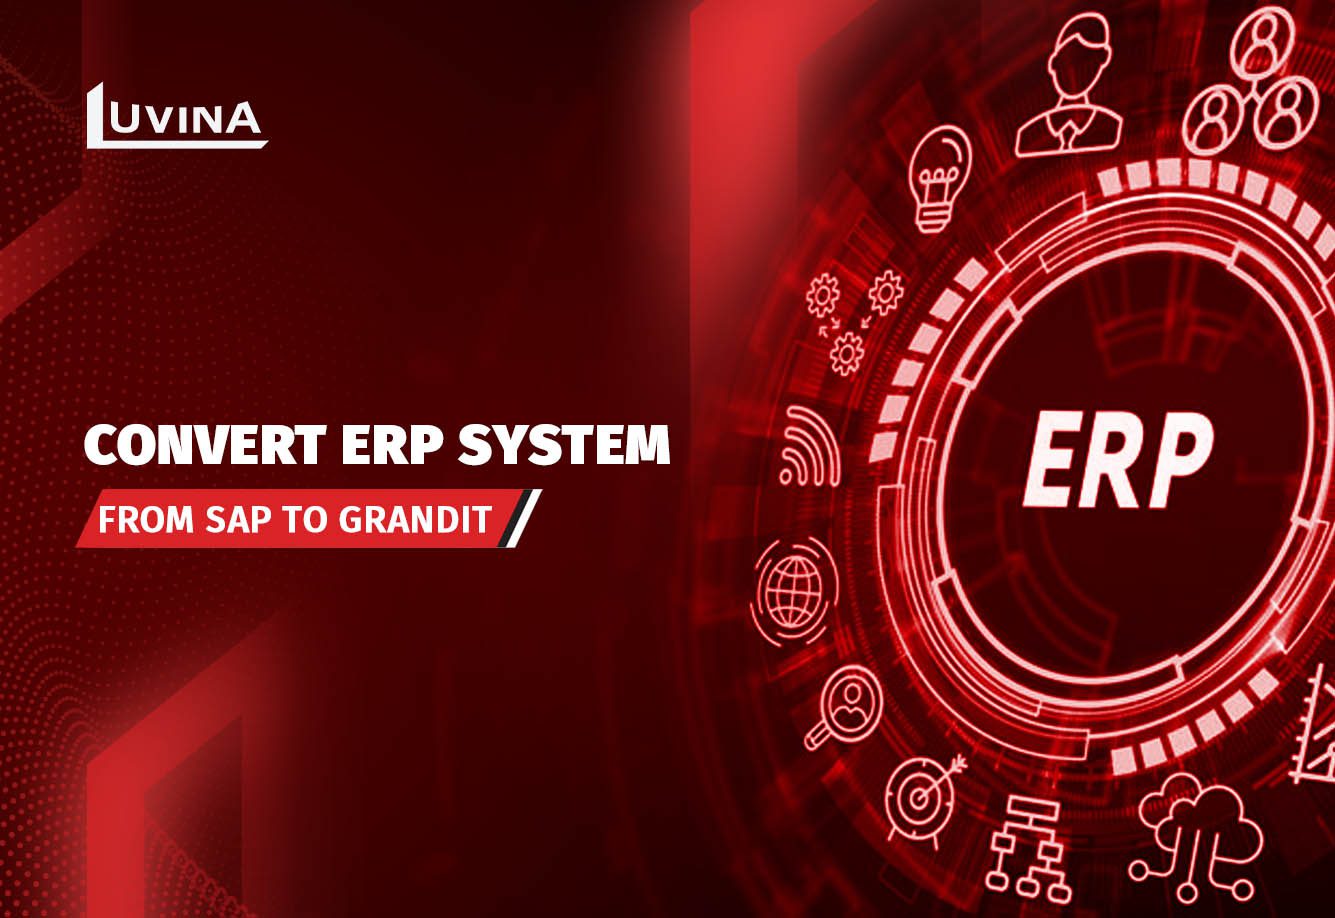 Converting ERP systems from SAP to GRANDIT for leading Japanese enterprises